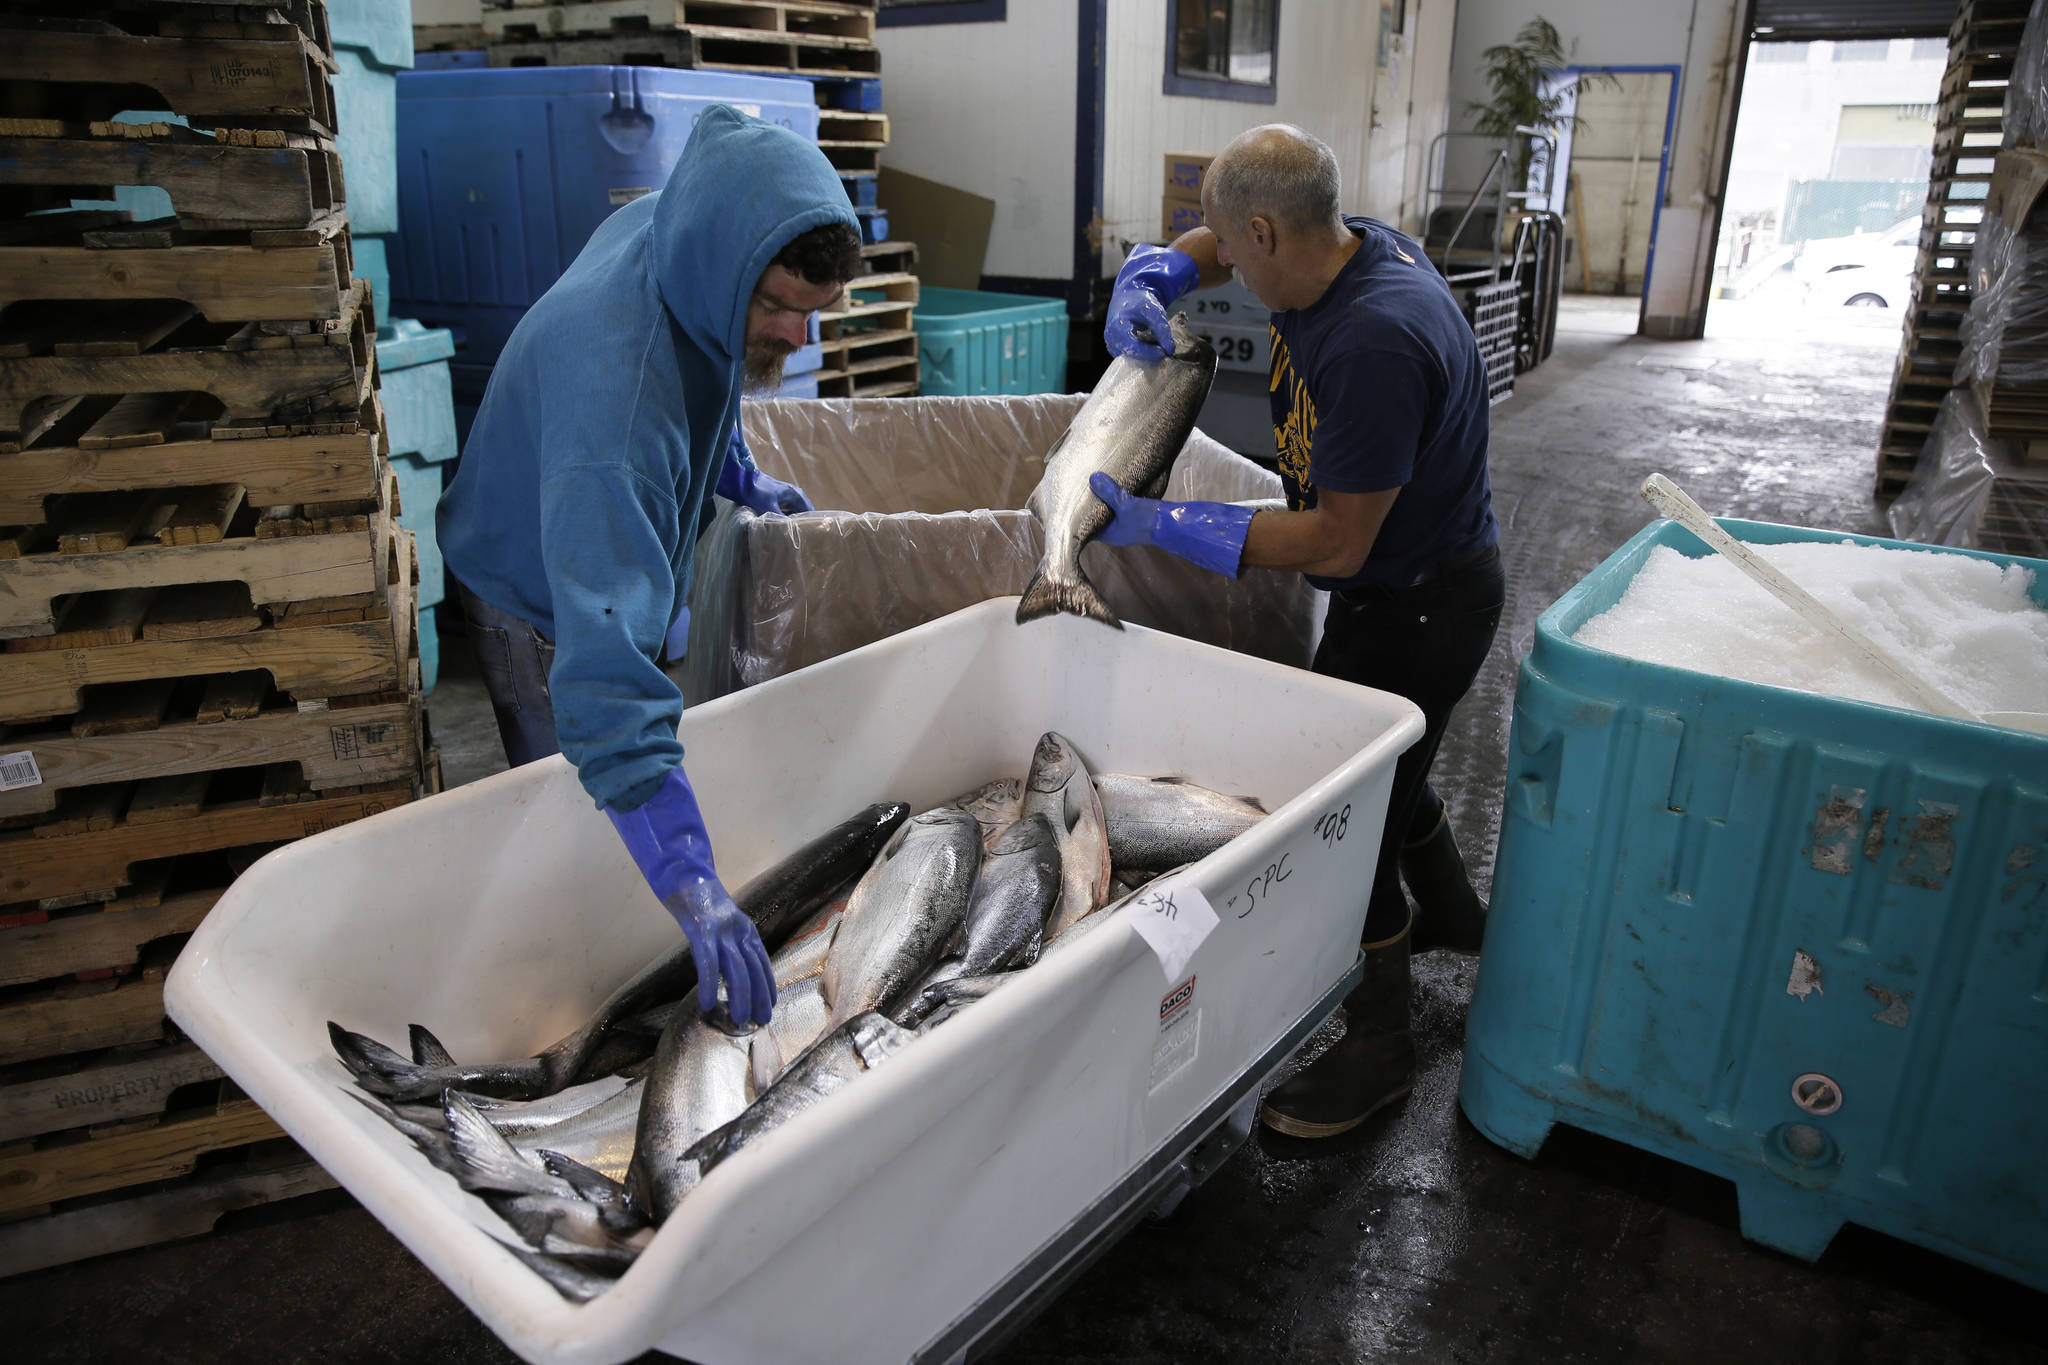 In this photo taken Monday, July 22, 2019, Mark Adams, right, unloads chinook salmon inside a cooperative at Fisherman’s Wharf in San Francisco. California fishermen are reporting one of the best salmon fishing seasons in years, thanks to heavy rain and snow that ended the state’s historic drought. A marine scientist with California’s fish and wildlife agency says commercial catches have so far surpassed official preseason forecasts by roughly 50 percent. (AP Photo/Eric Risberg)